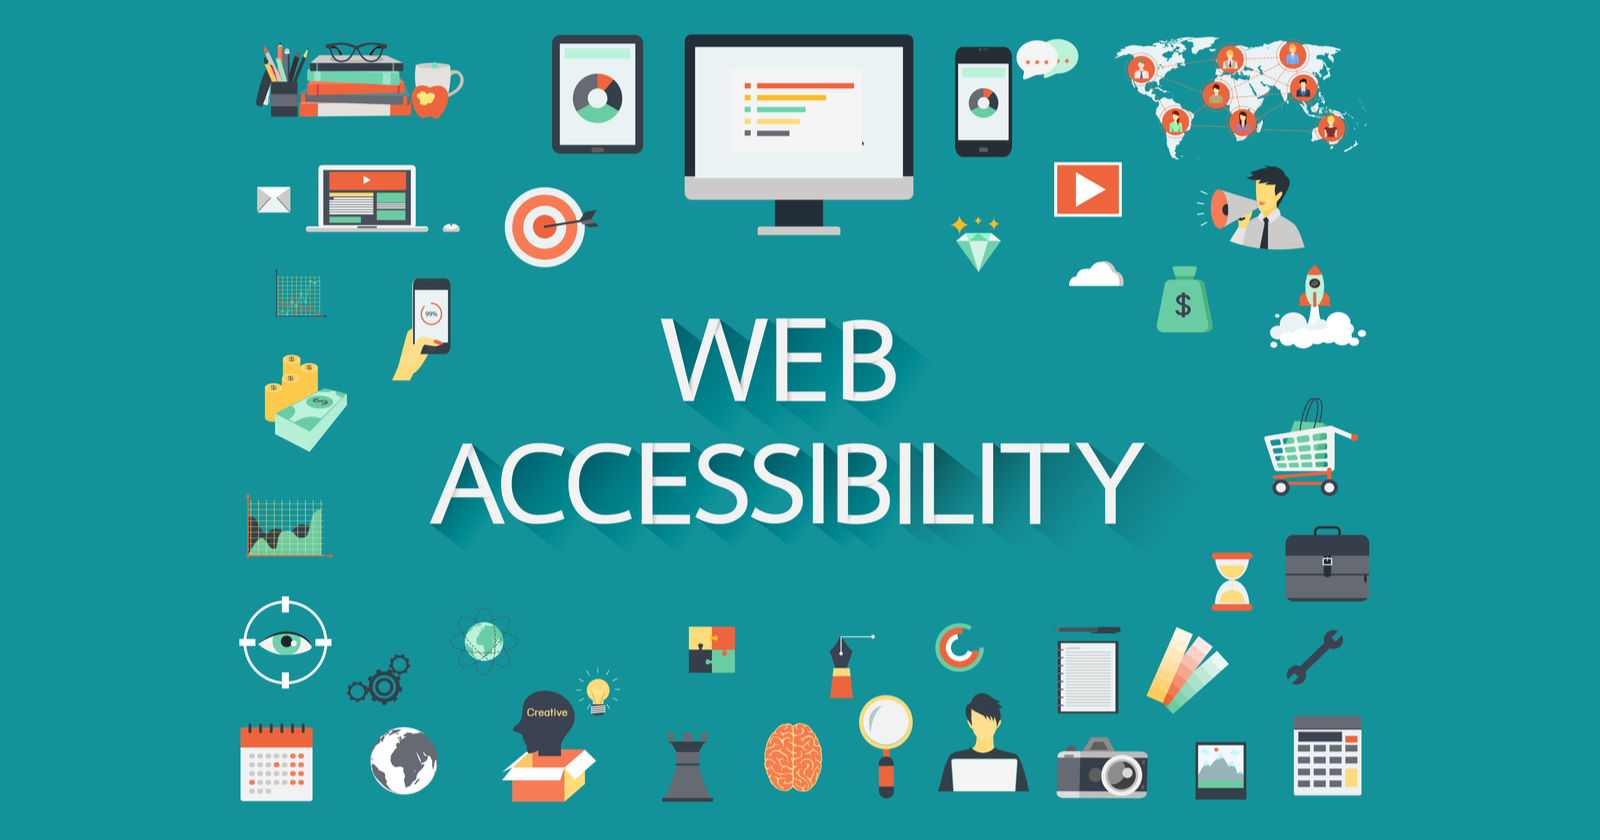 9 ways you can make your website more accessible 5f3f5d3bd7a34